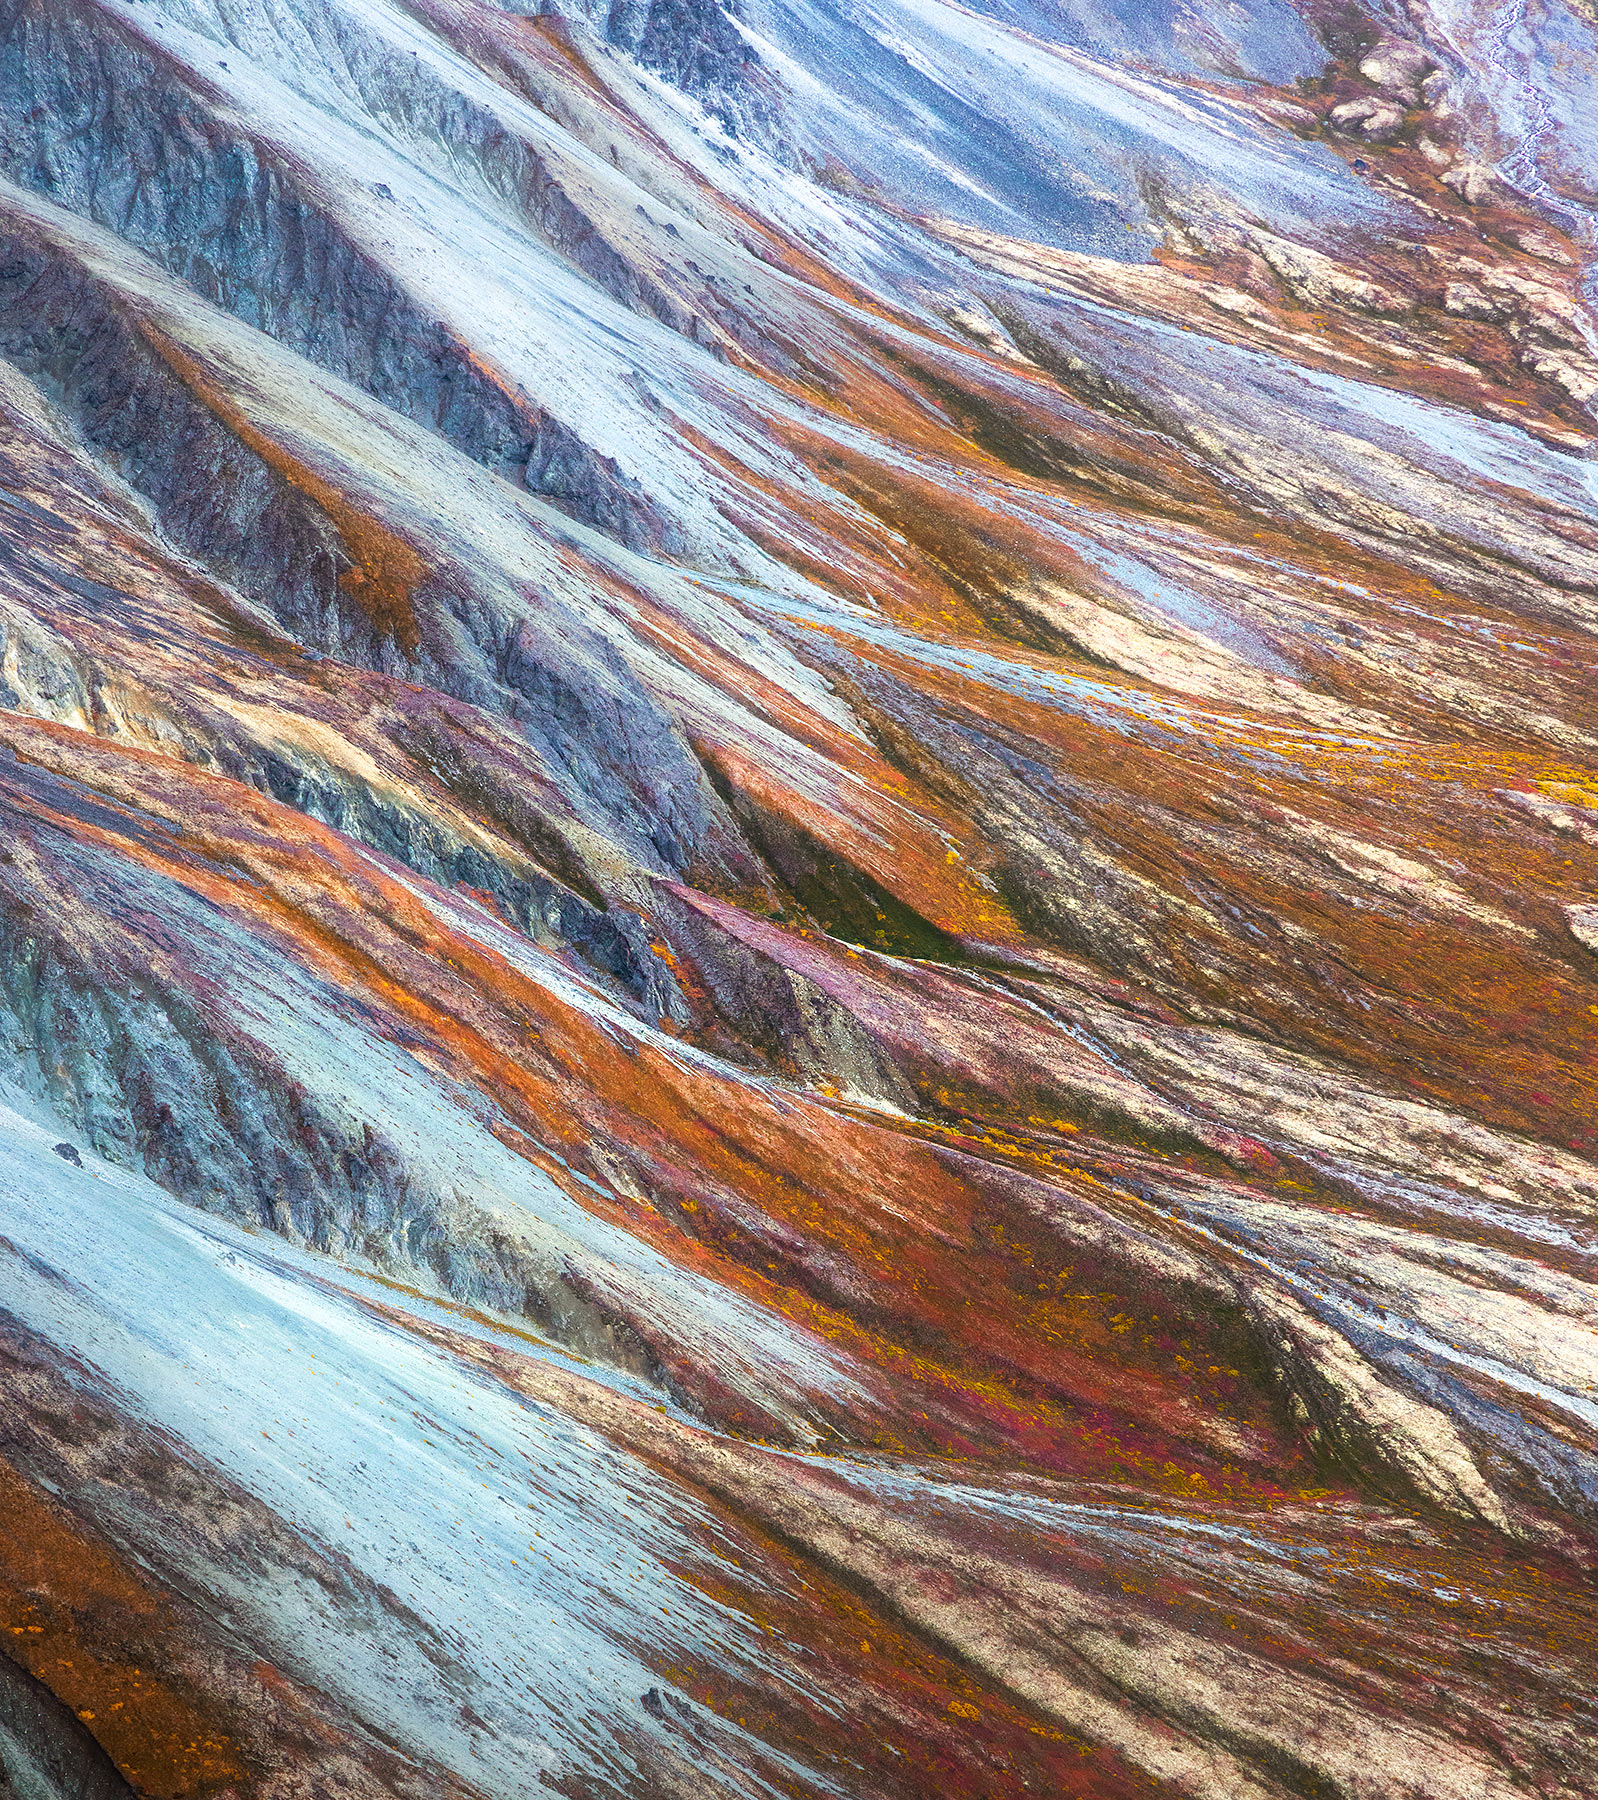 Abstract impressionism found in the natural world, Alaska.